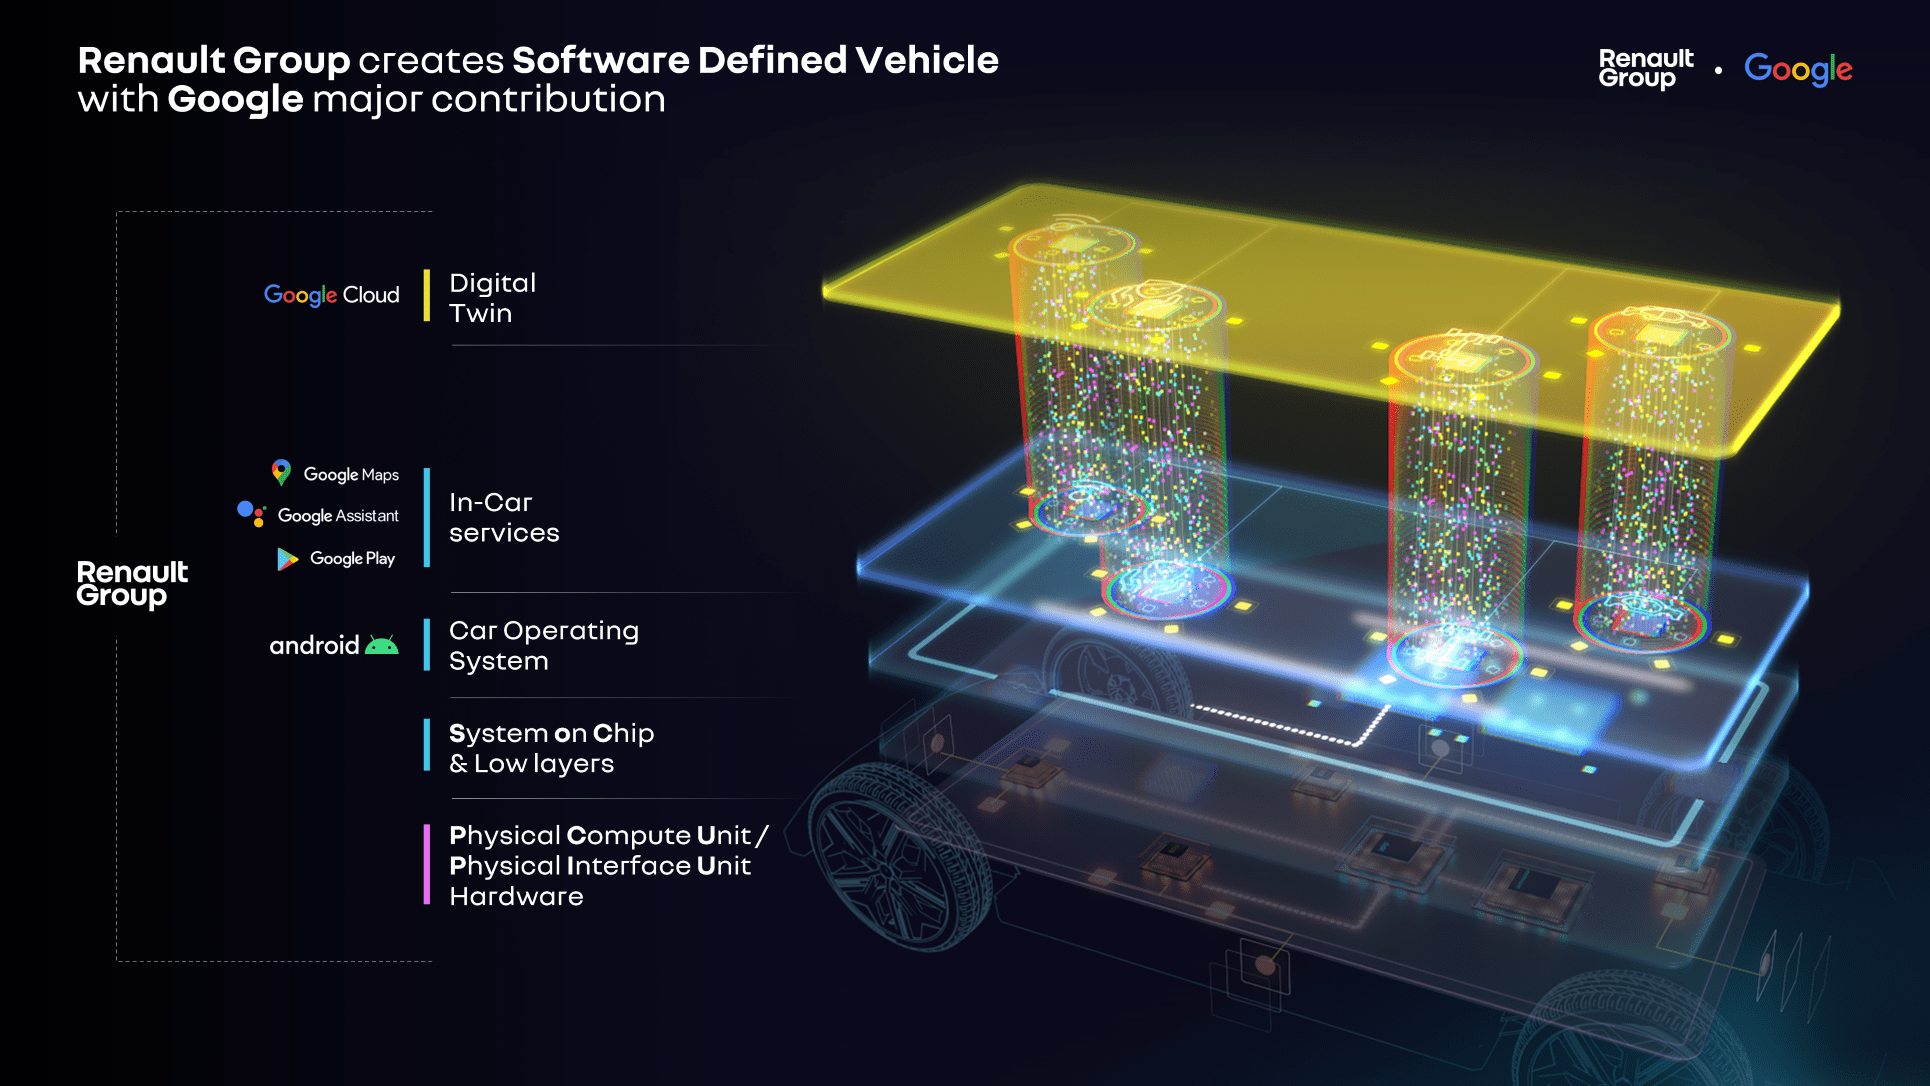 A map of Renault Group and Google's SDV or 'Software Defined Vehicle' broken down into its key components.